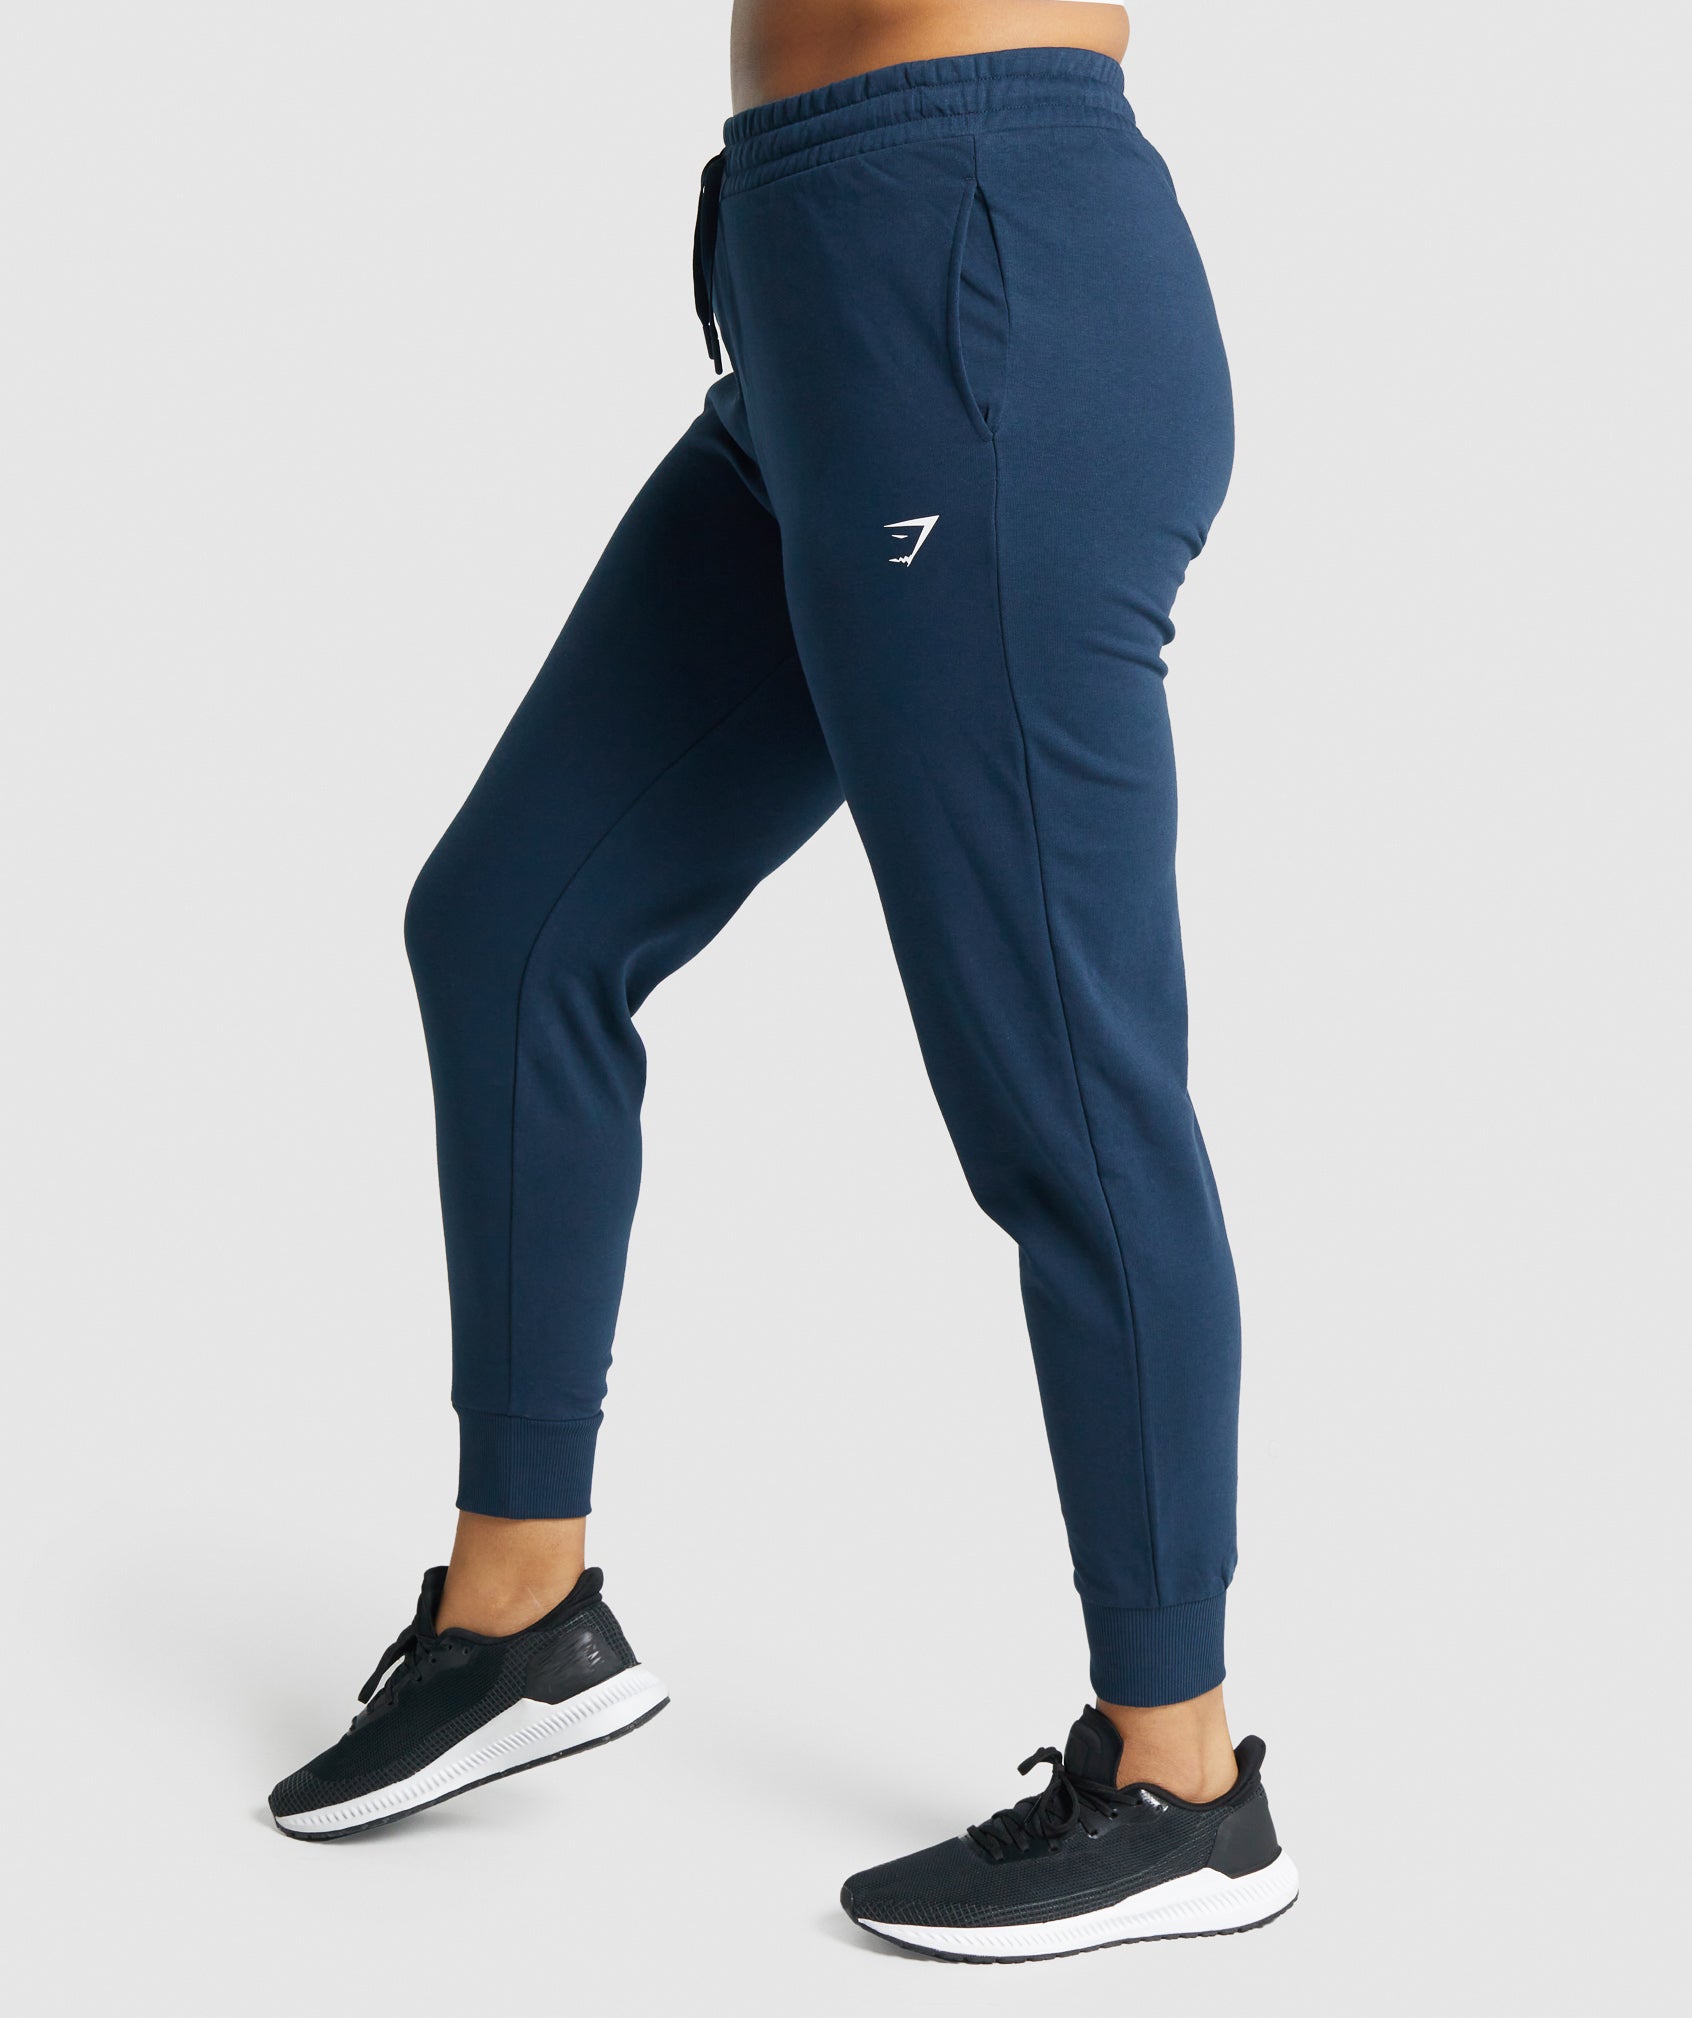 https://cdn.shopify.com/s/files/1/2446/8477/products/TRAININGJOGGERS-NAVY22.C_ZH_ZH_533ff320-5d4e-4cd6-835f-93b2acb7c34a.jpg?v=1651849445